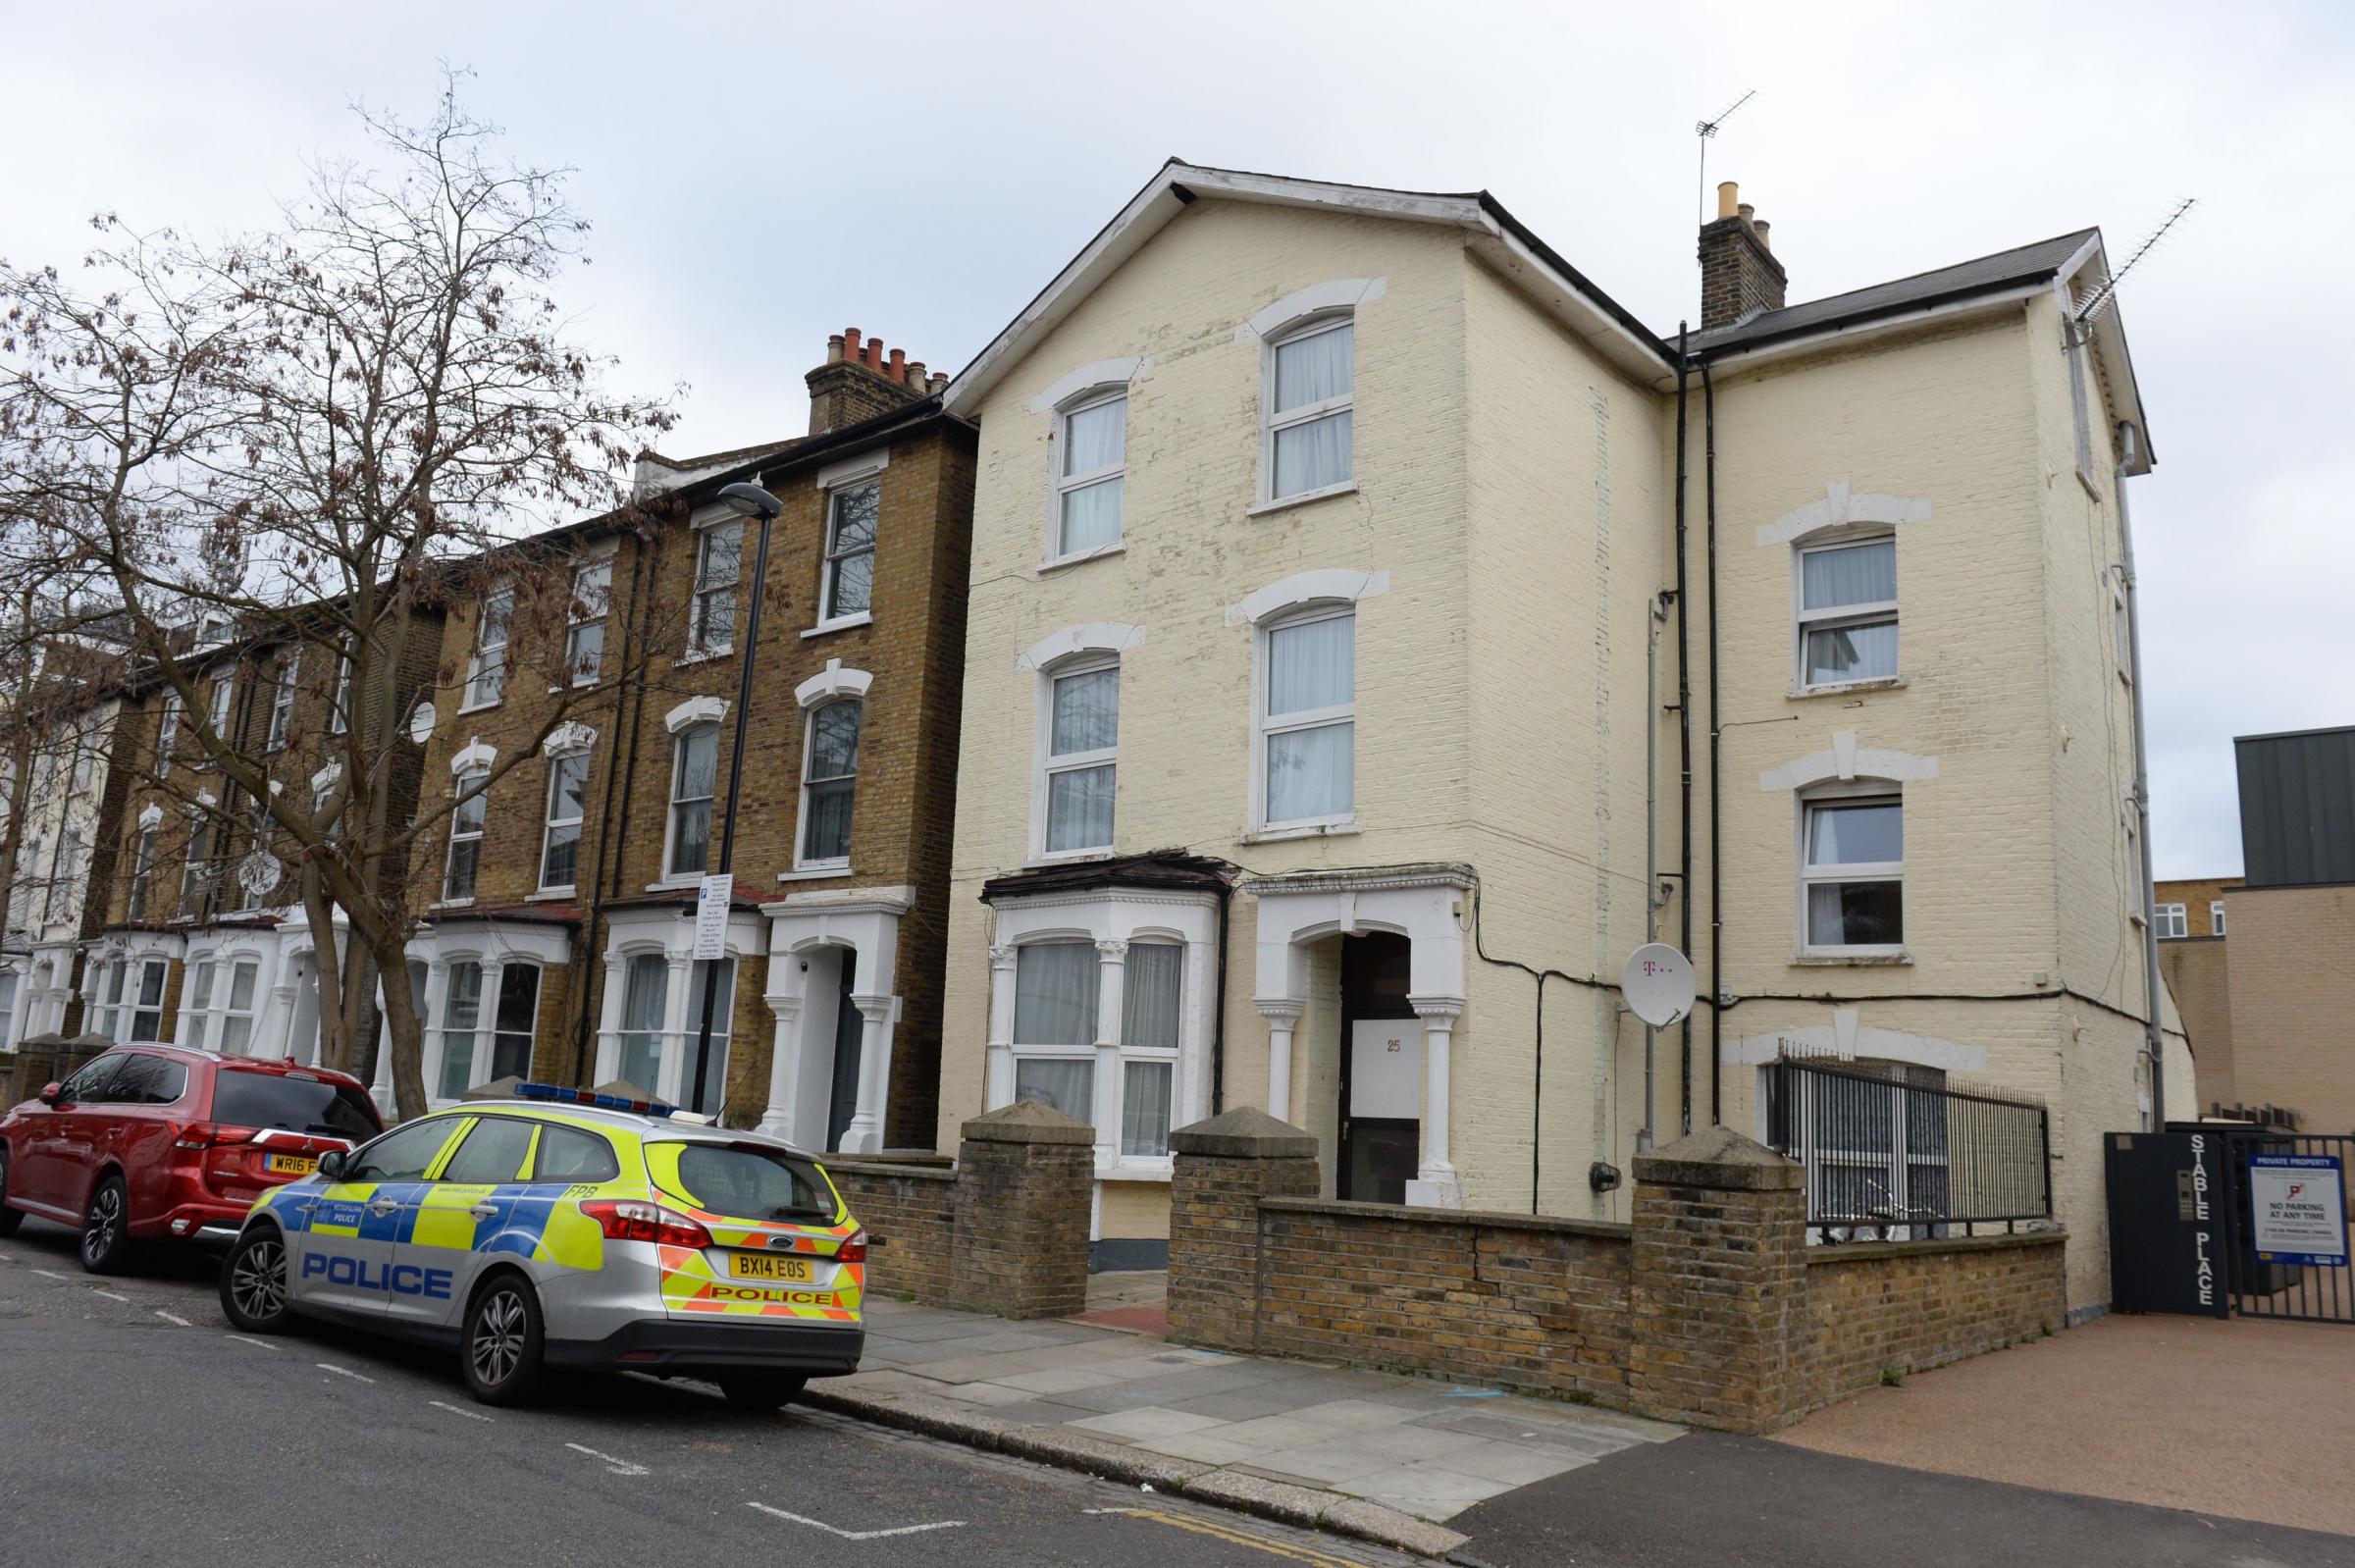 Man questioned on suspicion of murder after baby dies and twin fights for life